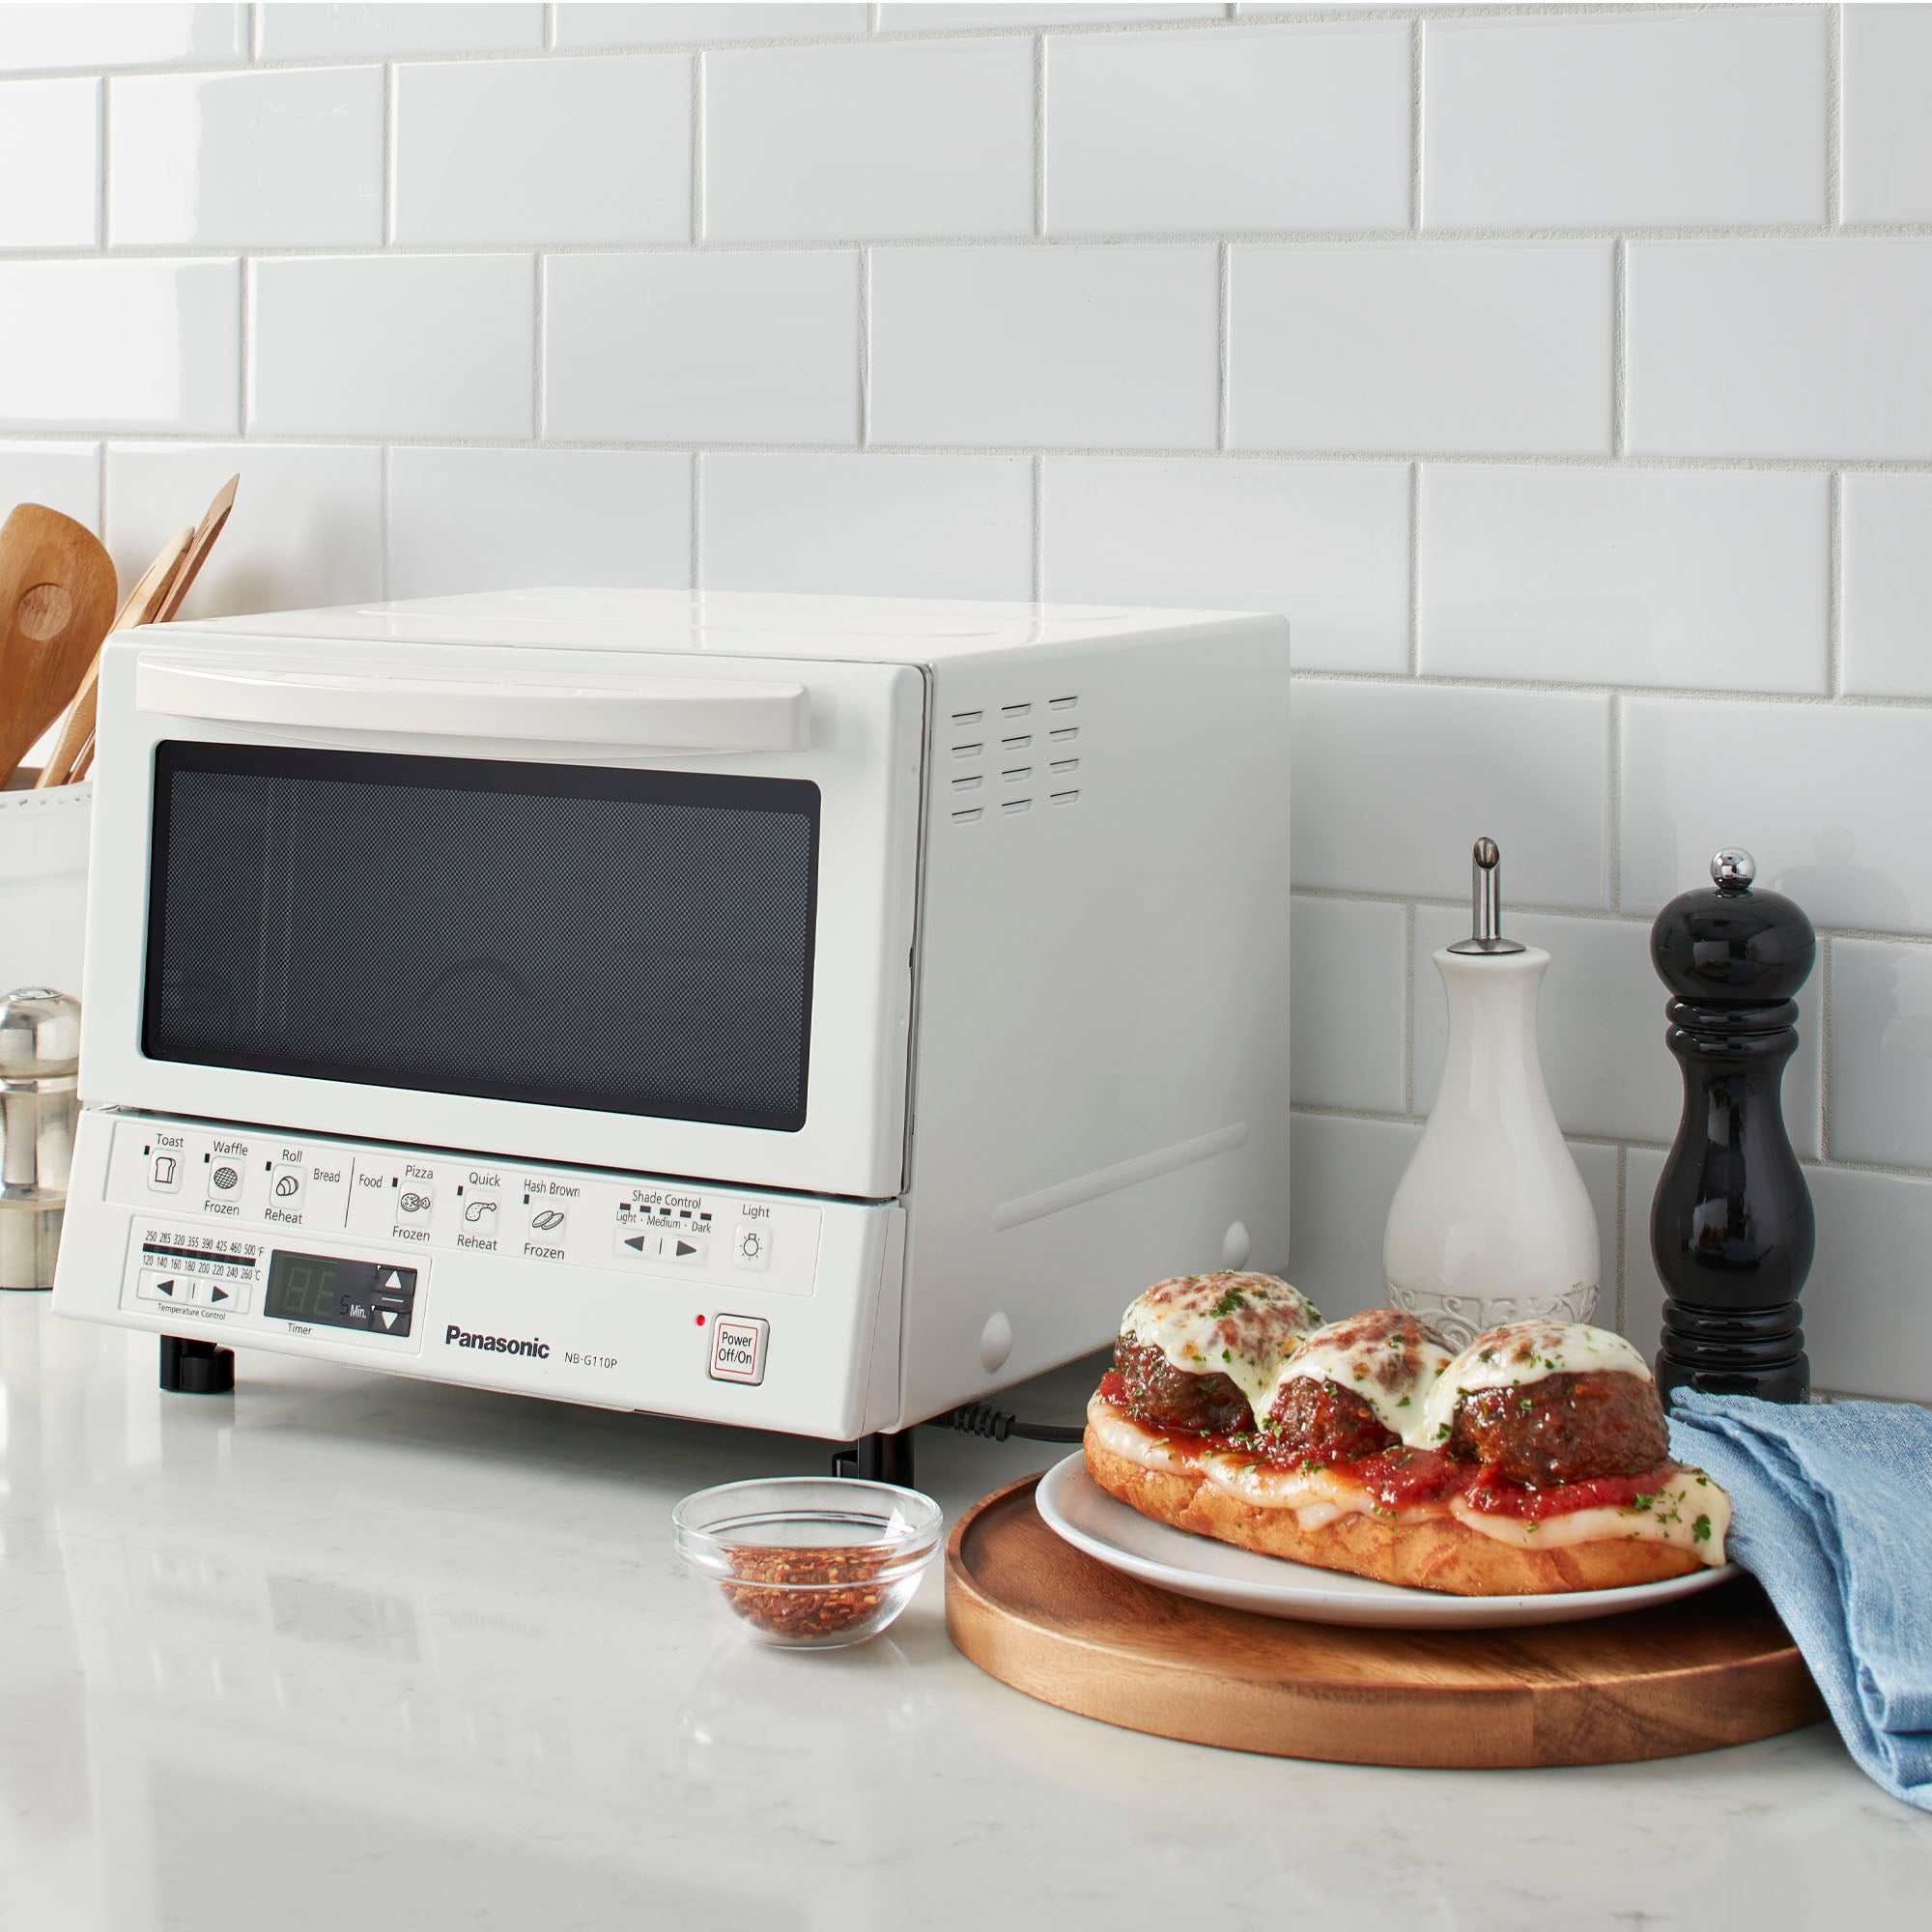  4 Slice Compact Toaster: Home & Kitchen